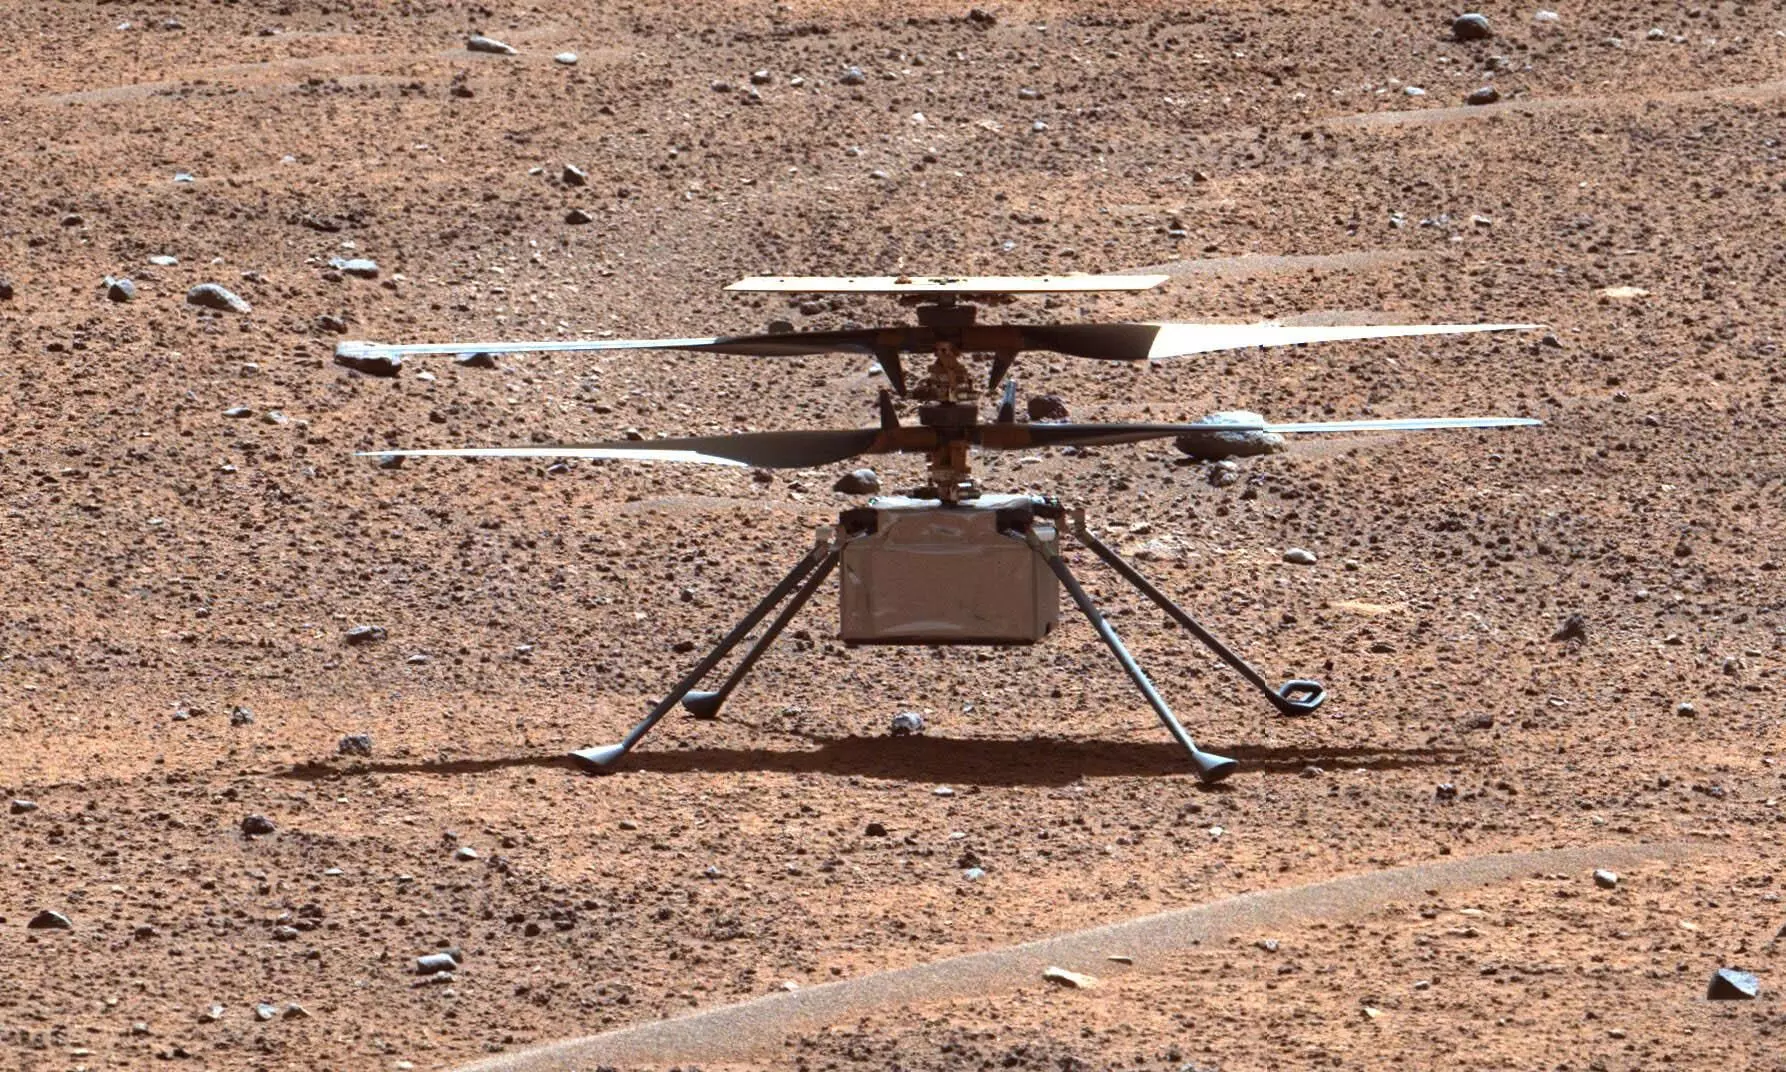 NASAs Ingenuity copter ends successful Mars mission